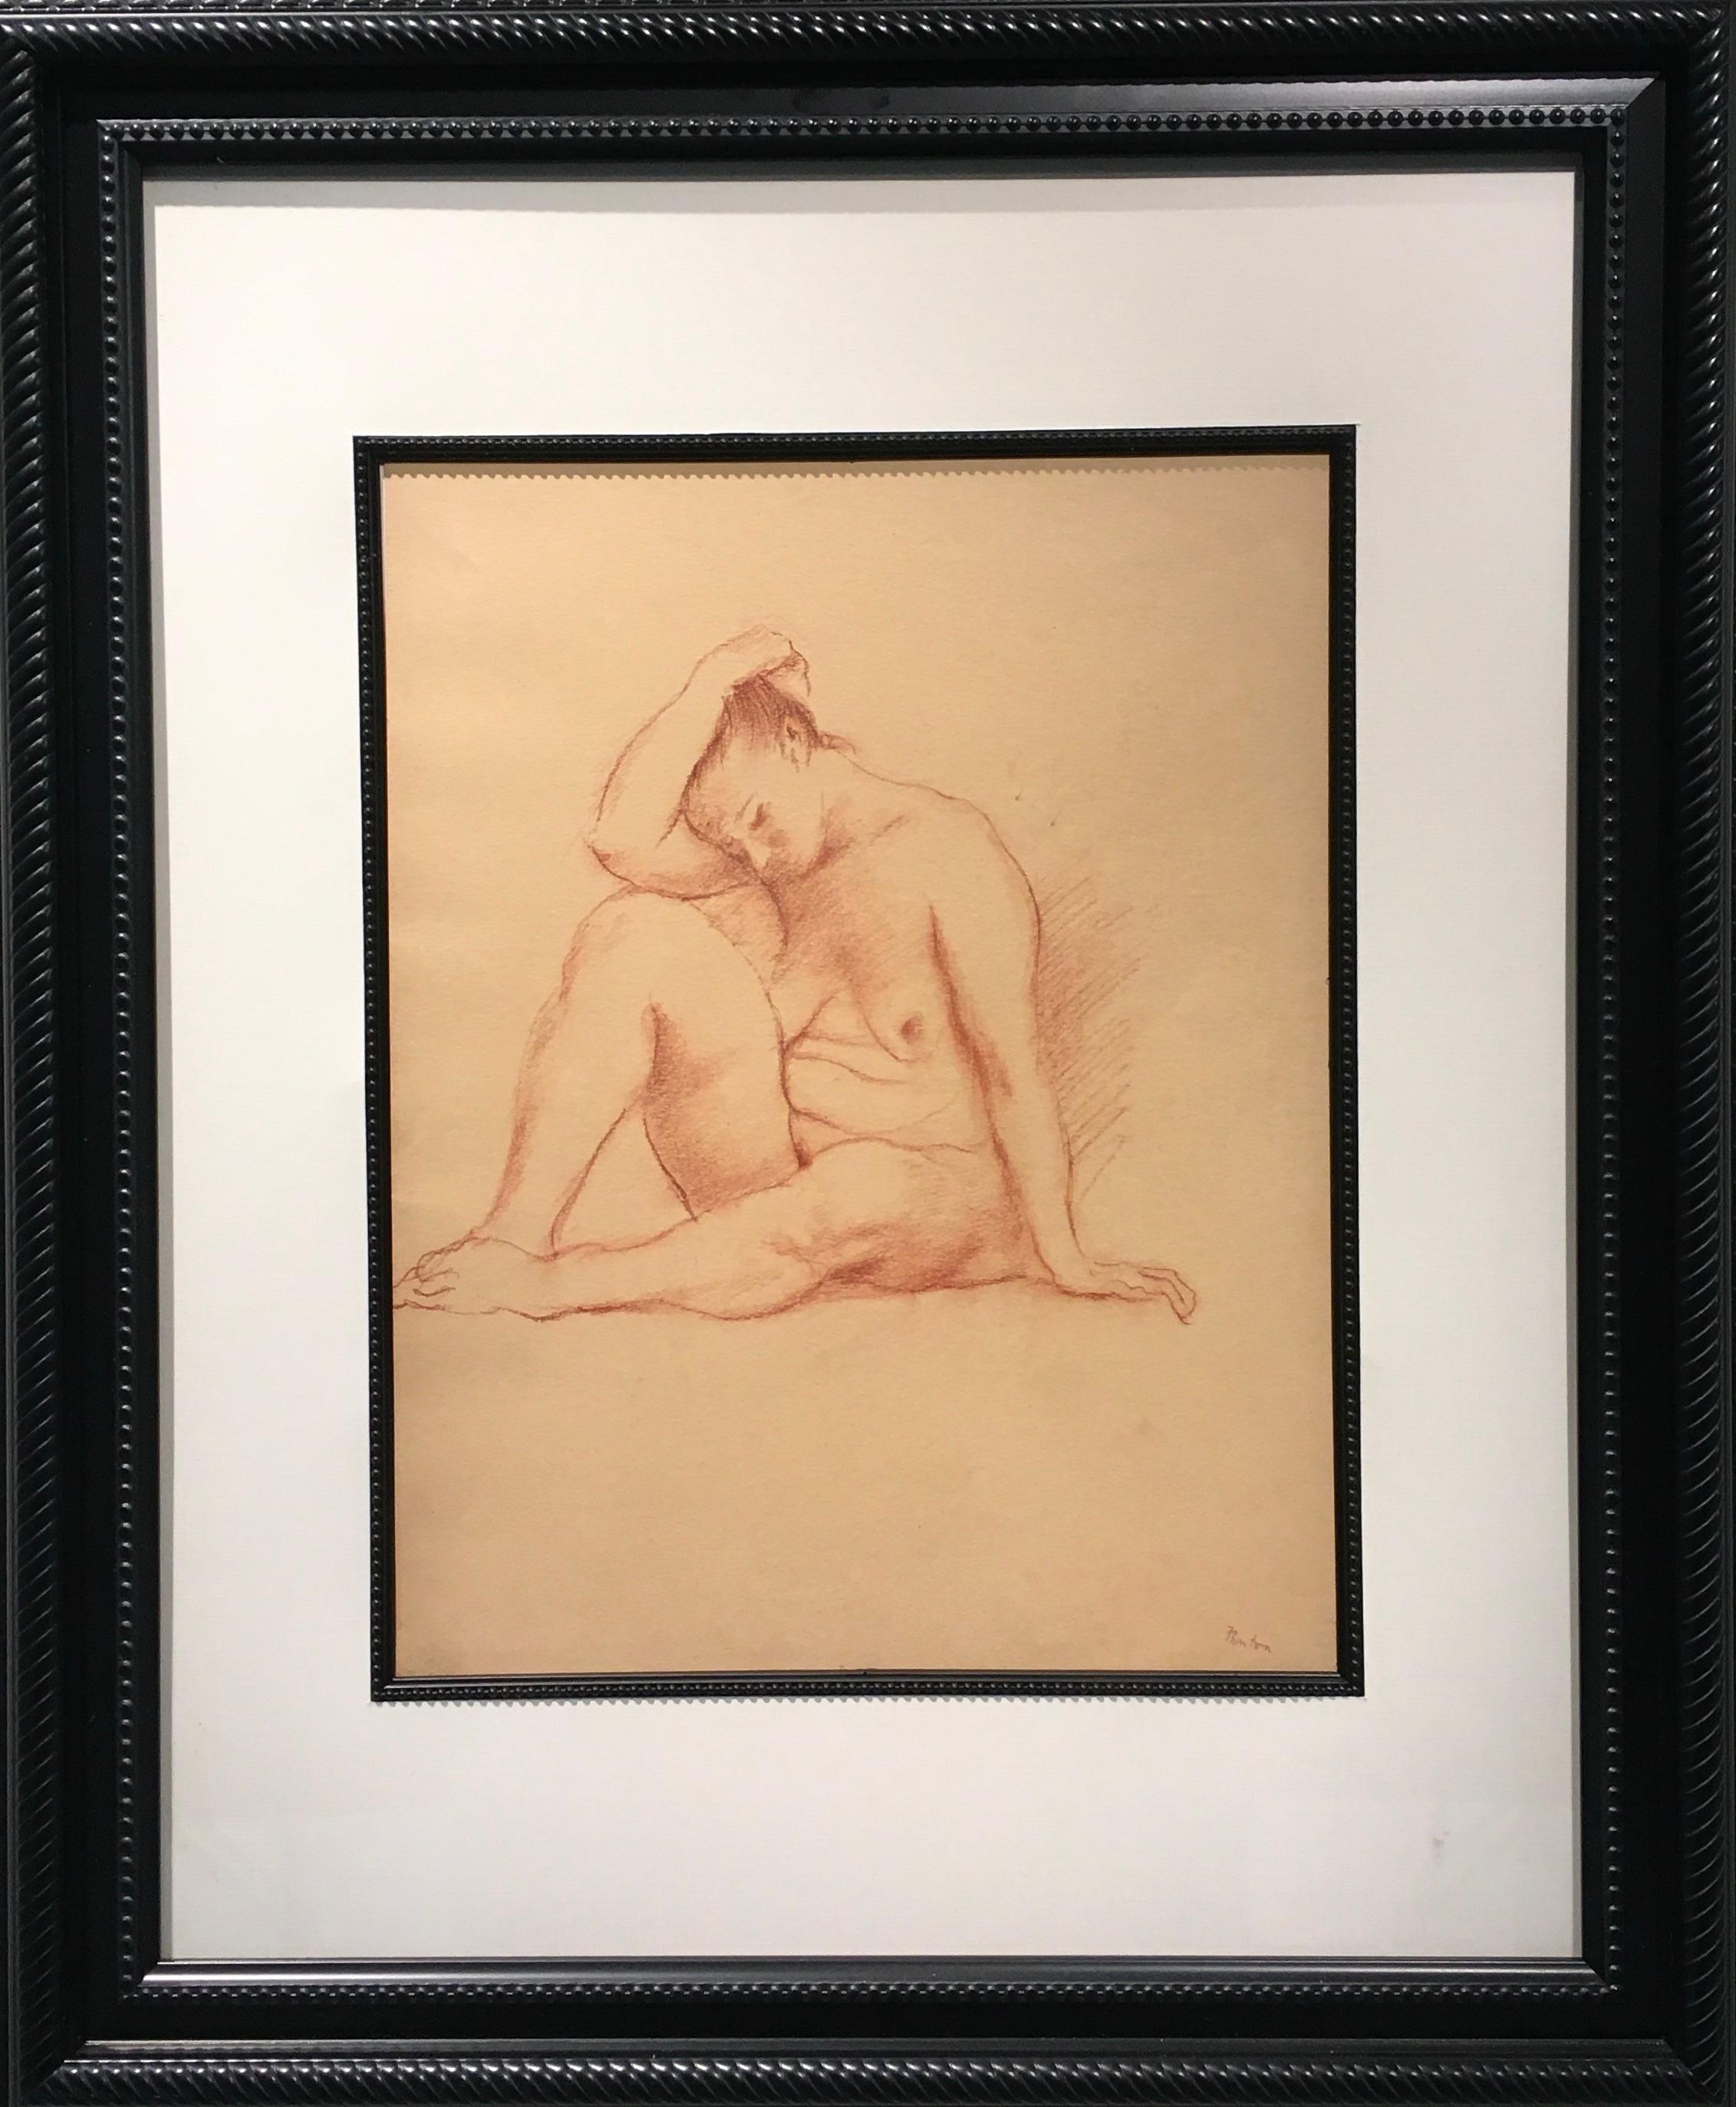 This framed 23.5" x 19.5" drawing of a seated female nude depicts the figure in a frontal pose leaning forward with one leg raised and elbow placed on her kneecap. Her head rests in the crook of her arm while her gaze is cast downward. The drawing